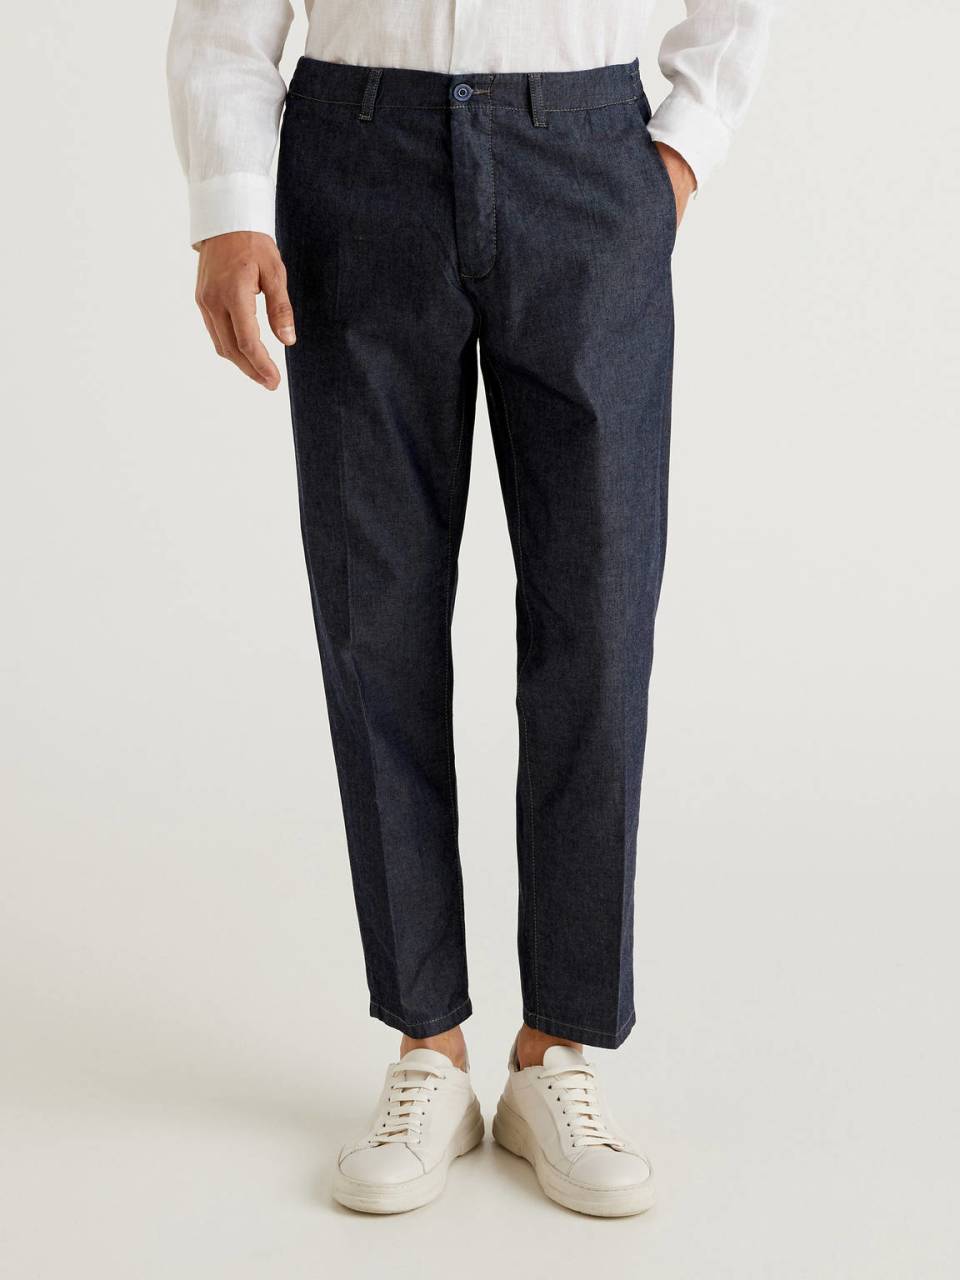 Benetton Trousers in cotton chambray. 1